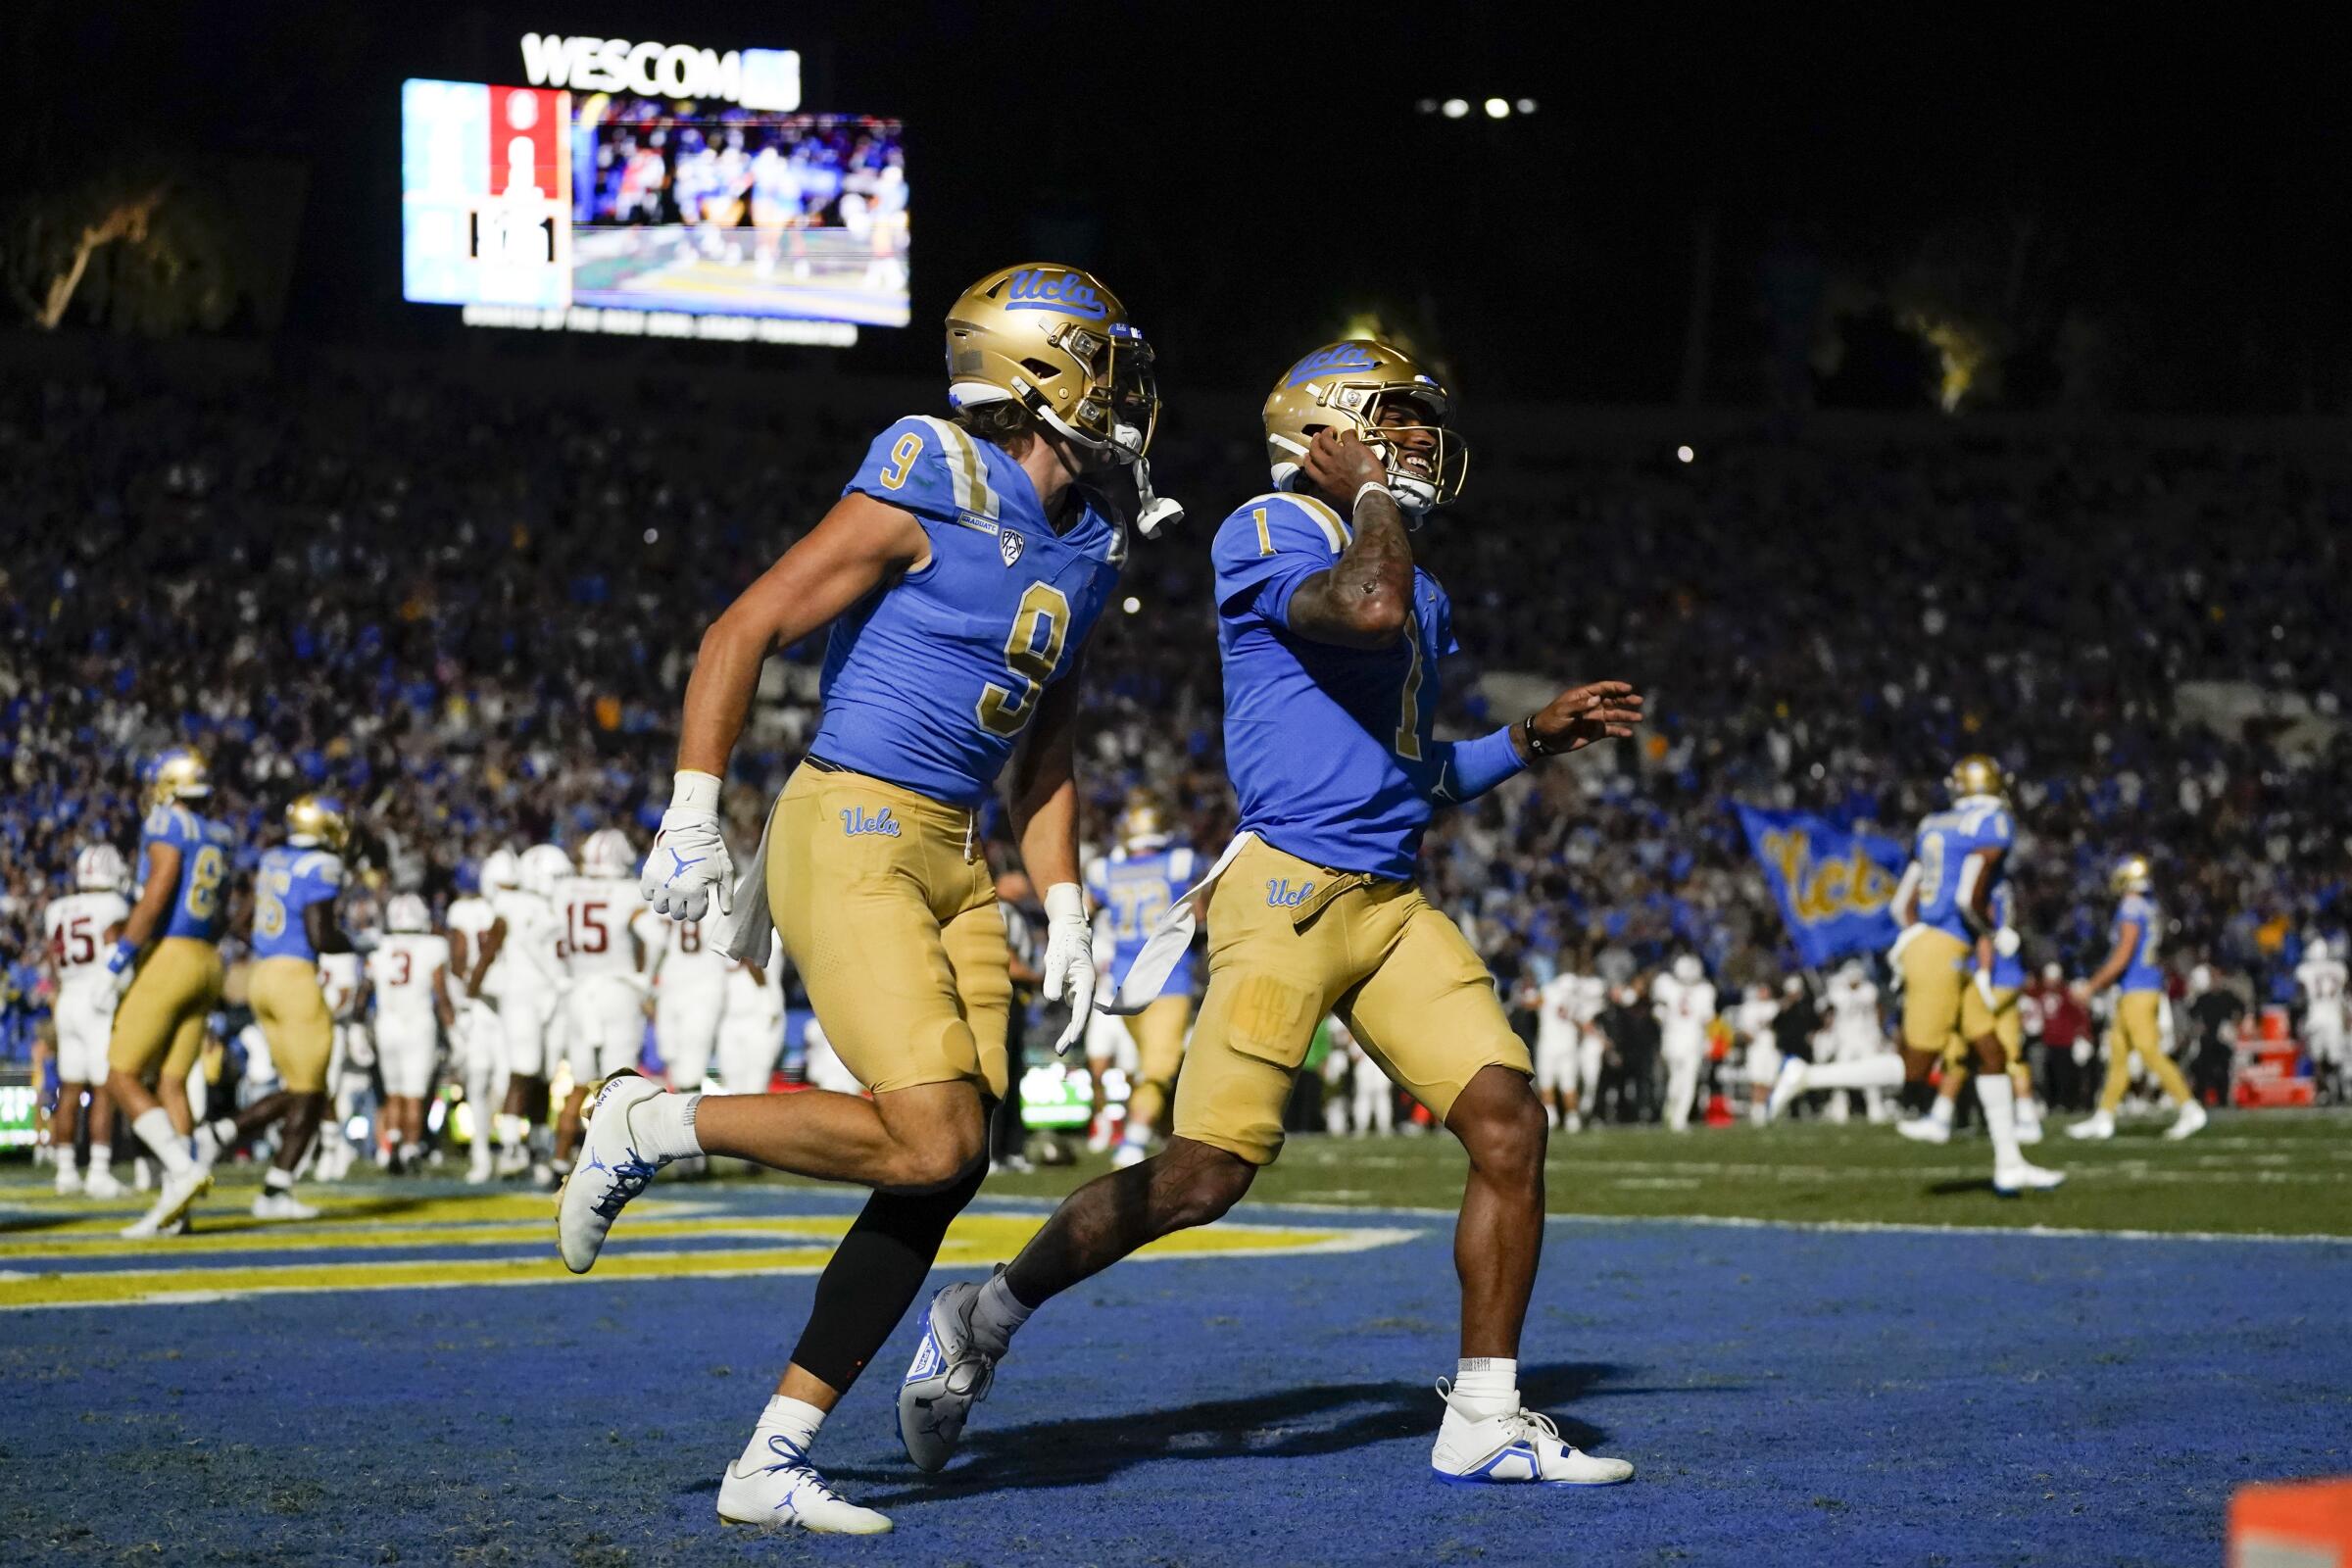 Jake Bobo and Dorian Thompson-Robinson run after scoring a touchdown for UCLA.